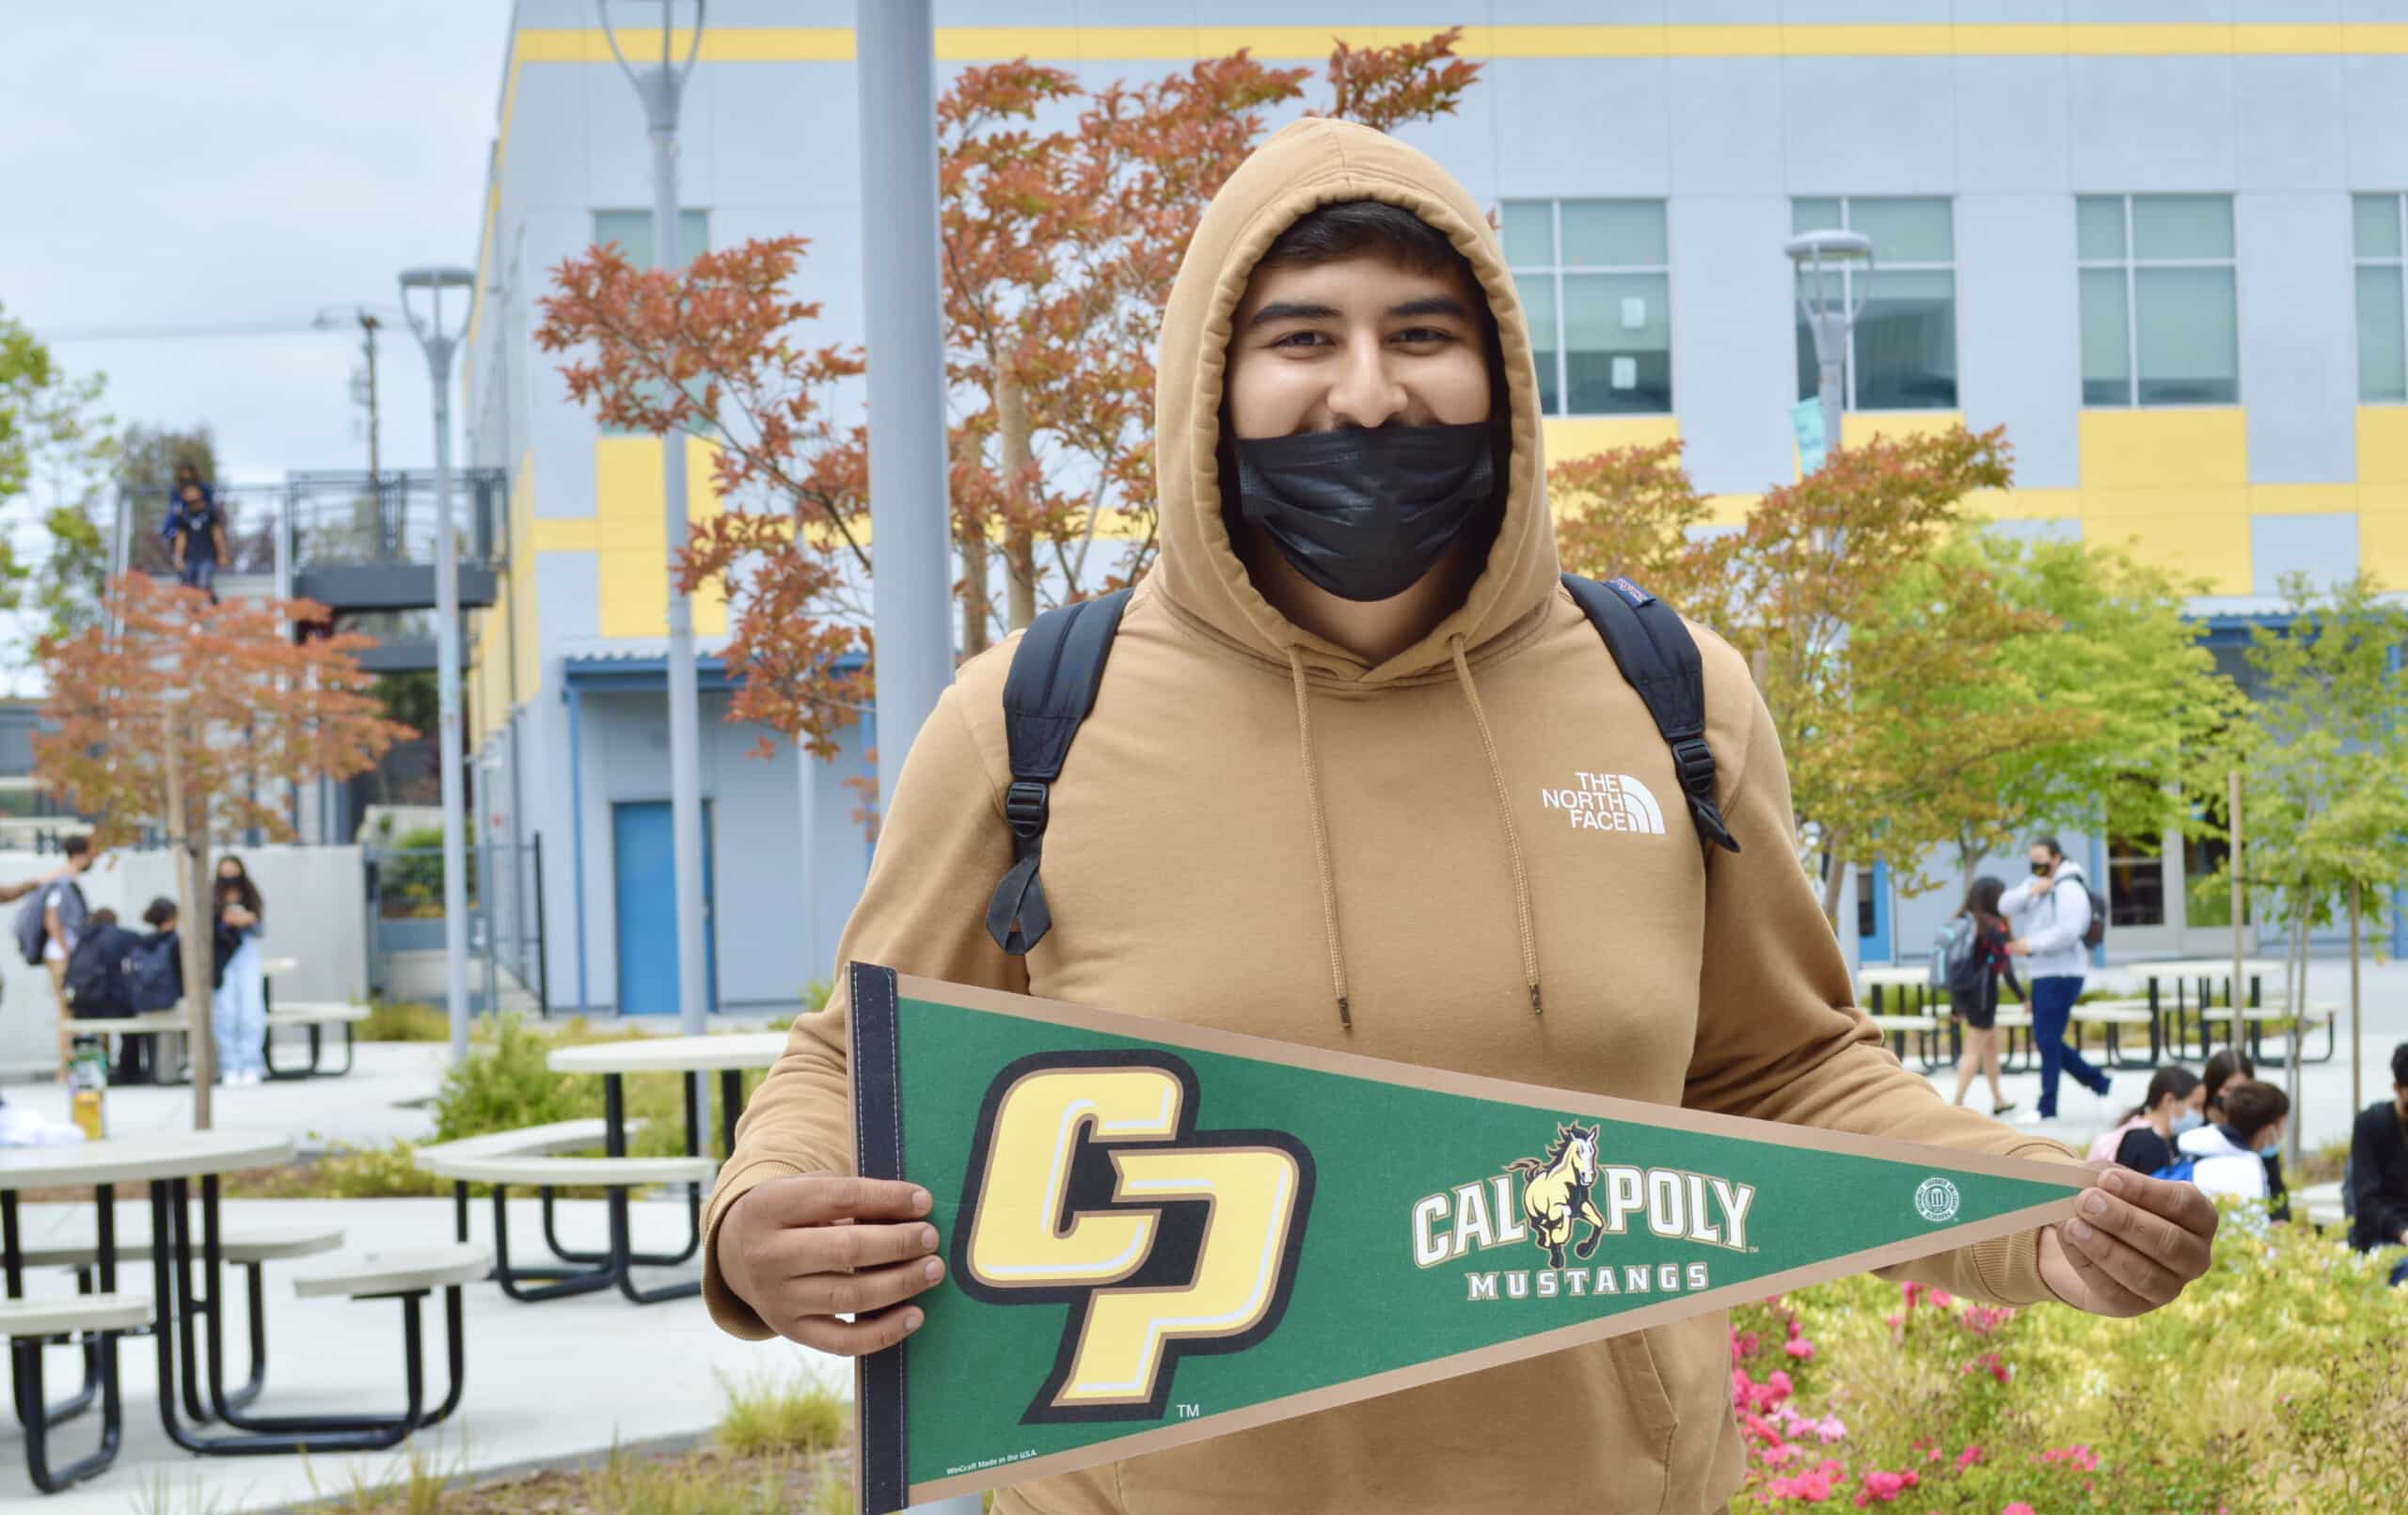 Making Waves Academy student holding Cal Poly flag